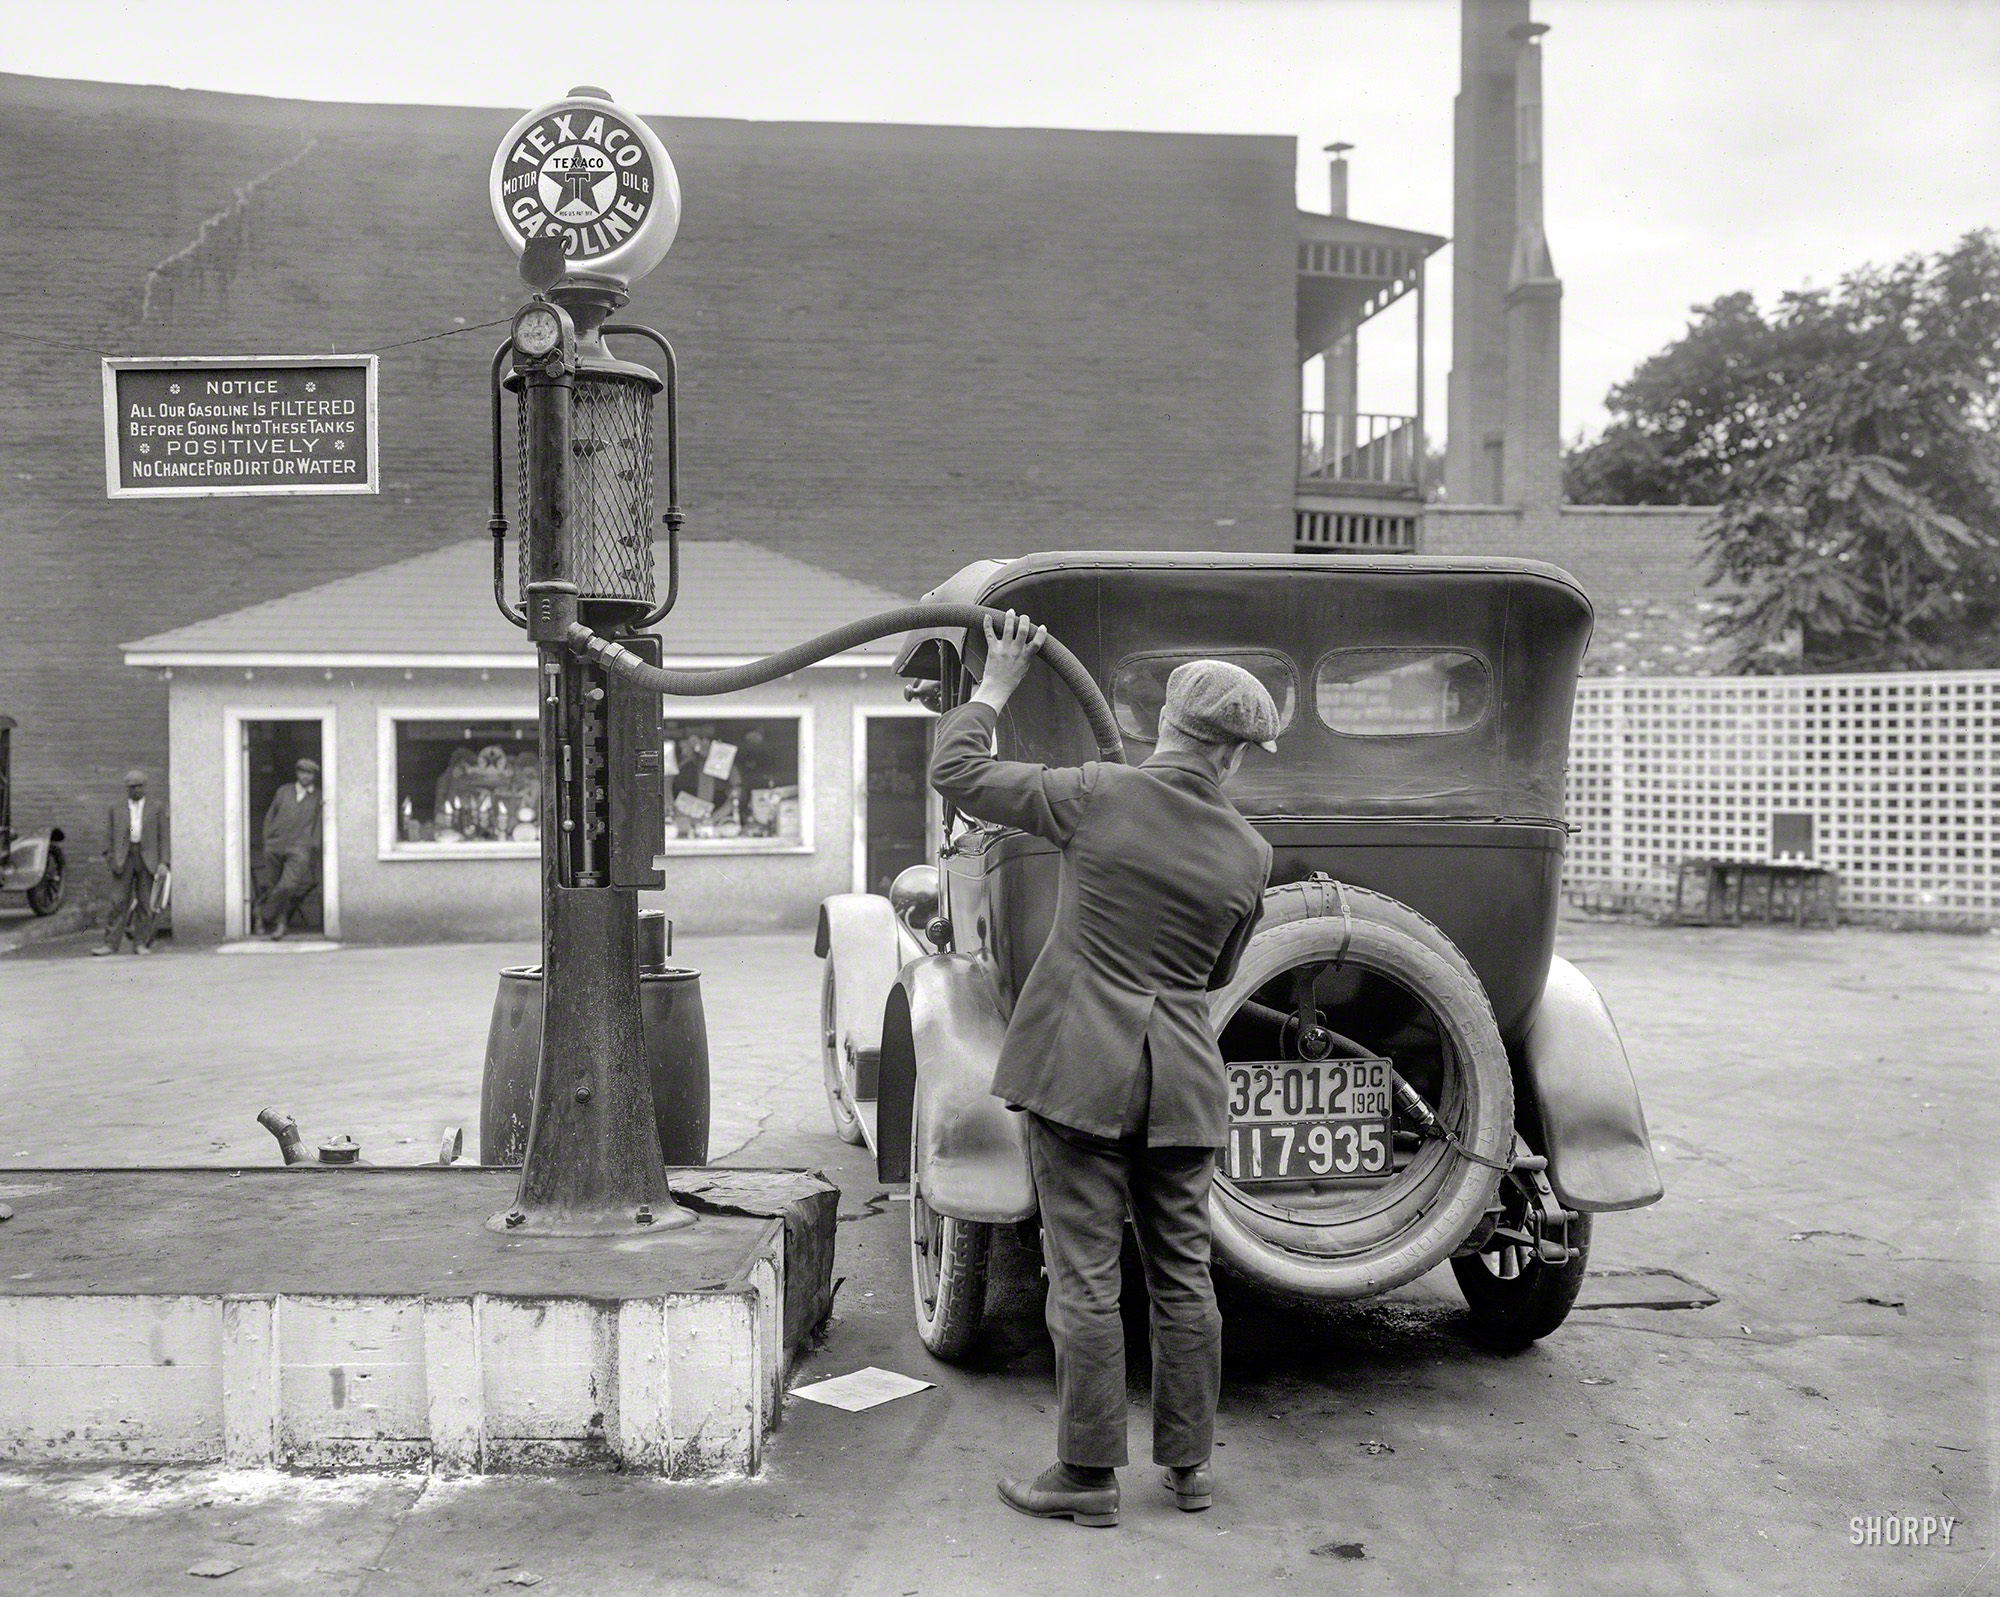 Washington, D.C., 1920. "Nation's Business." A photo made by Harris & Ewing for that magazine, giving an unusually detailed look at the gas station (and gas pump) of a century ago. 8x10 inch glass negative. View full size.